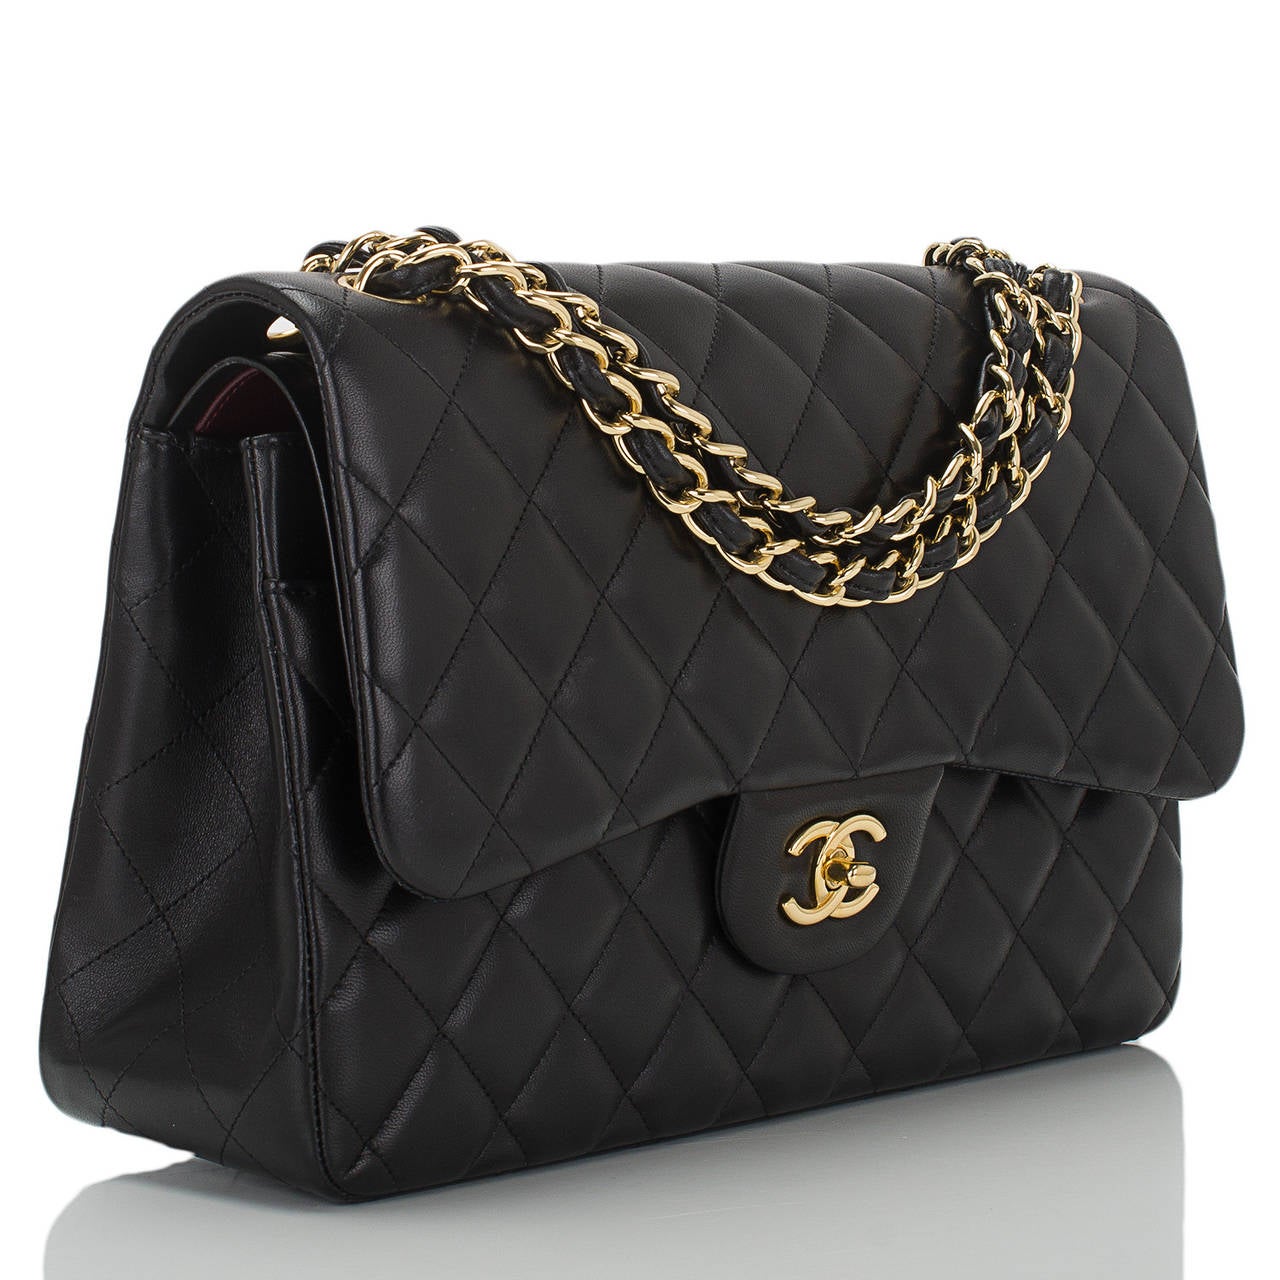 This Jumbo Classic double flap bag of black quilted lambskin leather is considered one the most coveted classic Chanel bags by many Chanel lovers. It features a front flap with signature CC turnlock closure, half moon back pocket, and an adjustable